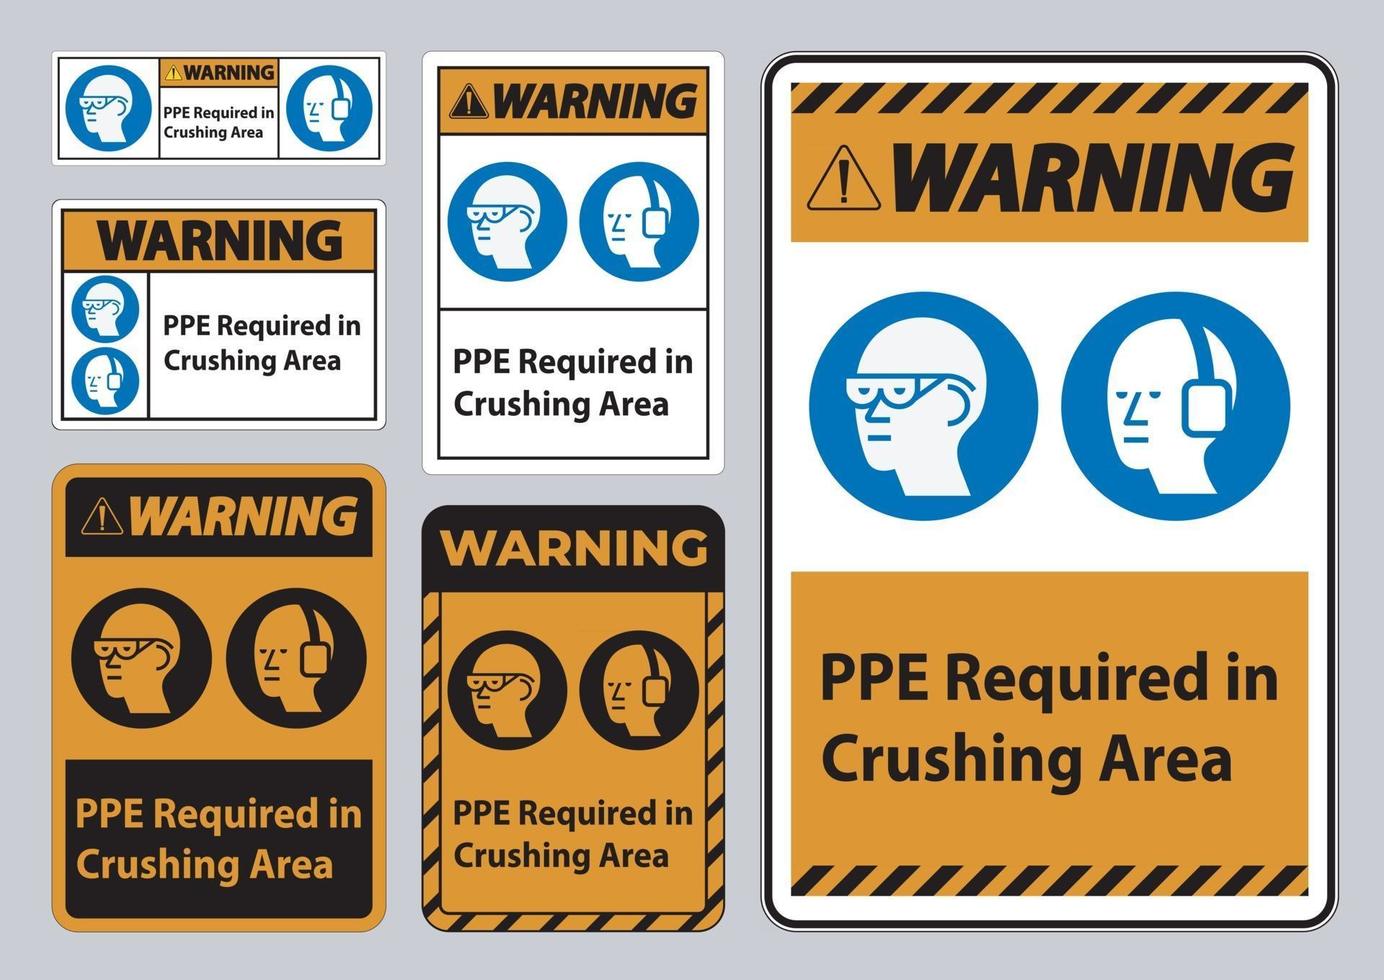 Warning Sign PPE Required In Crushing Area Isolate on White Background vector